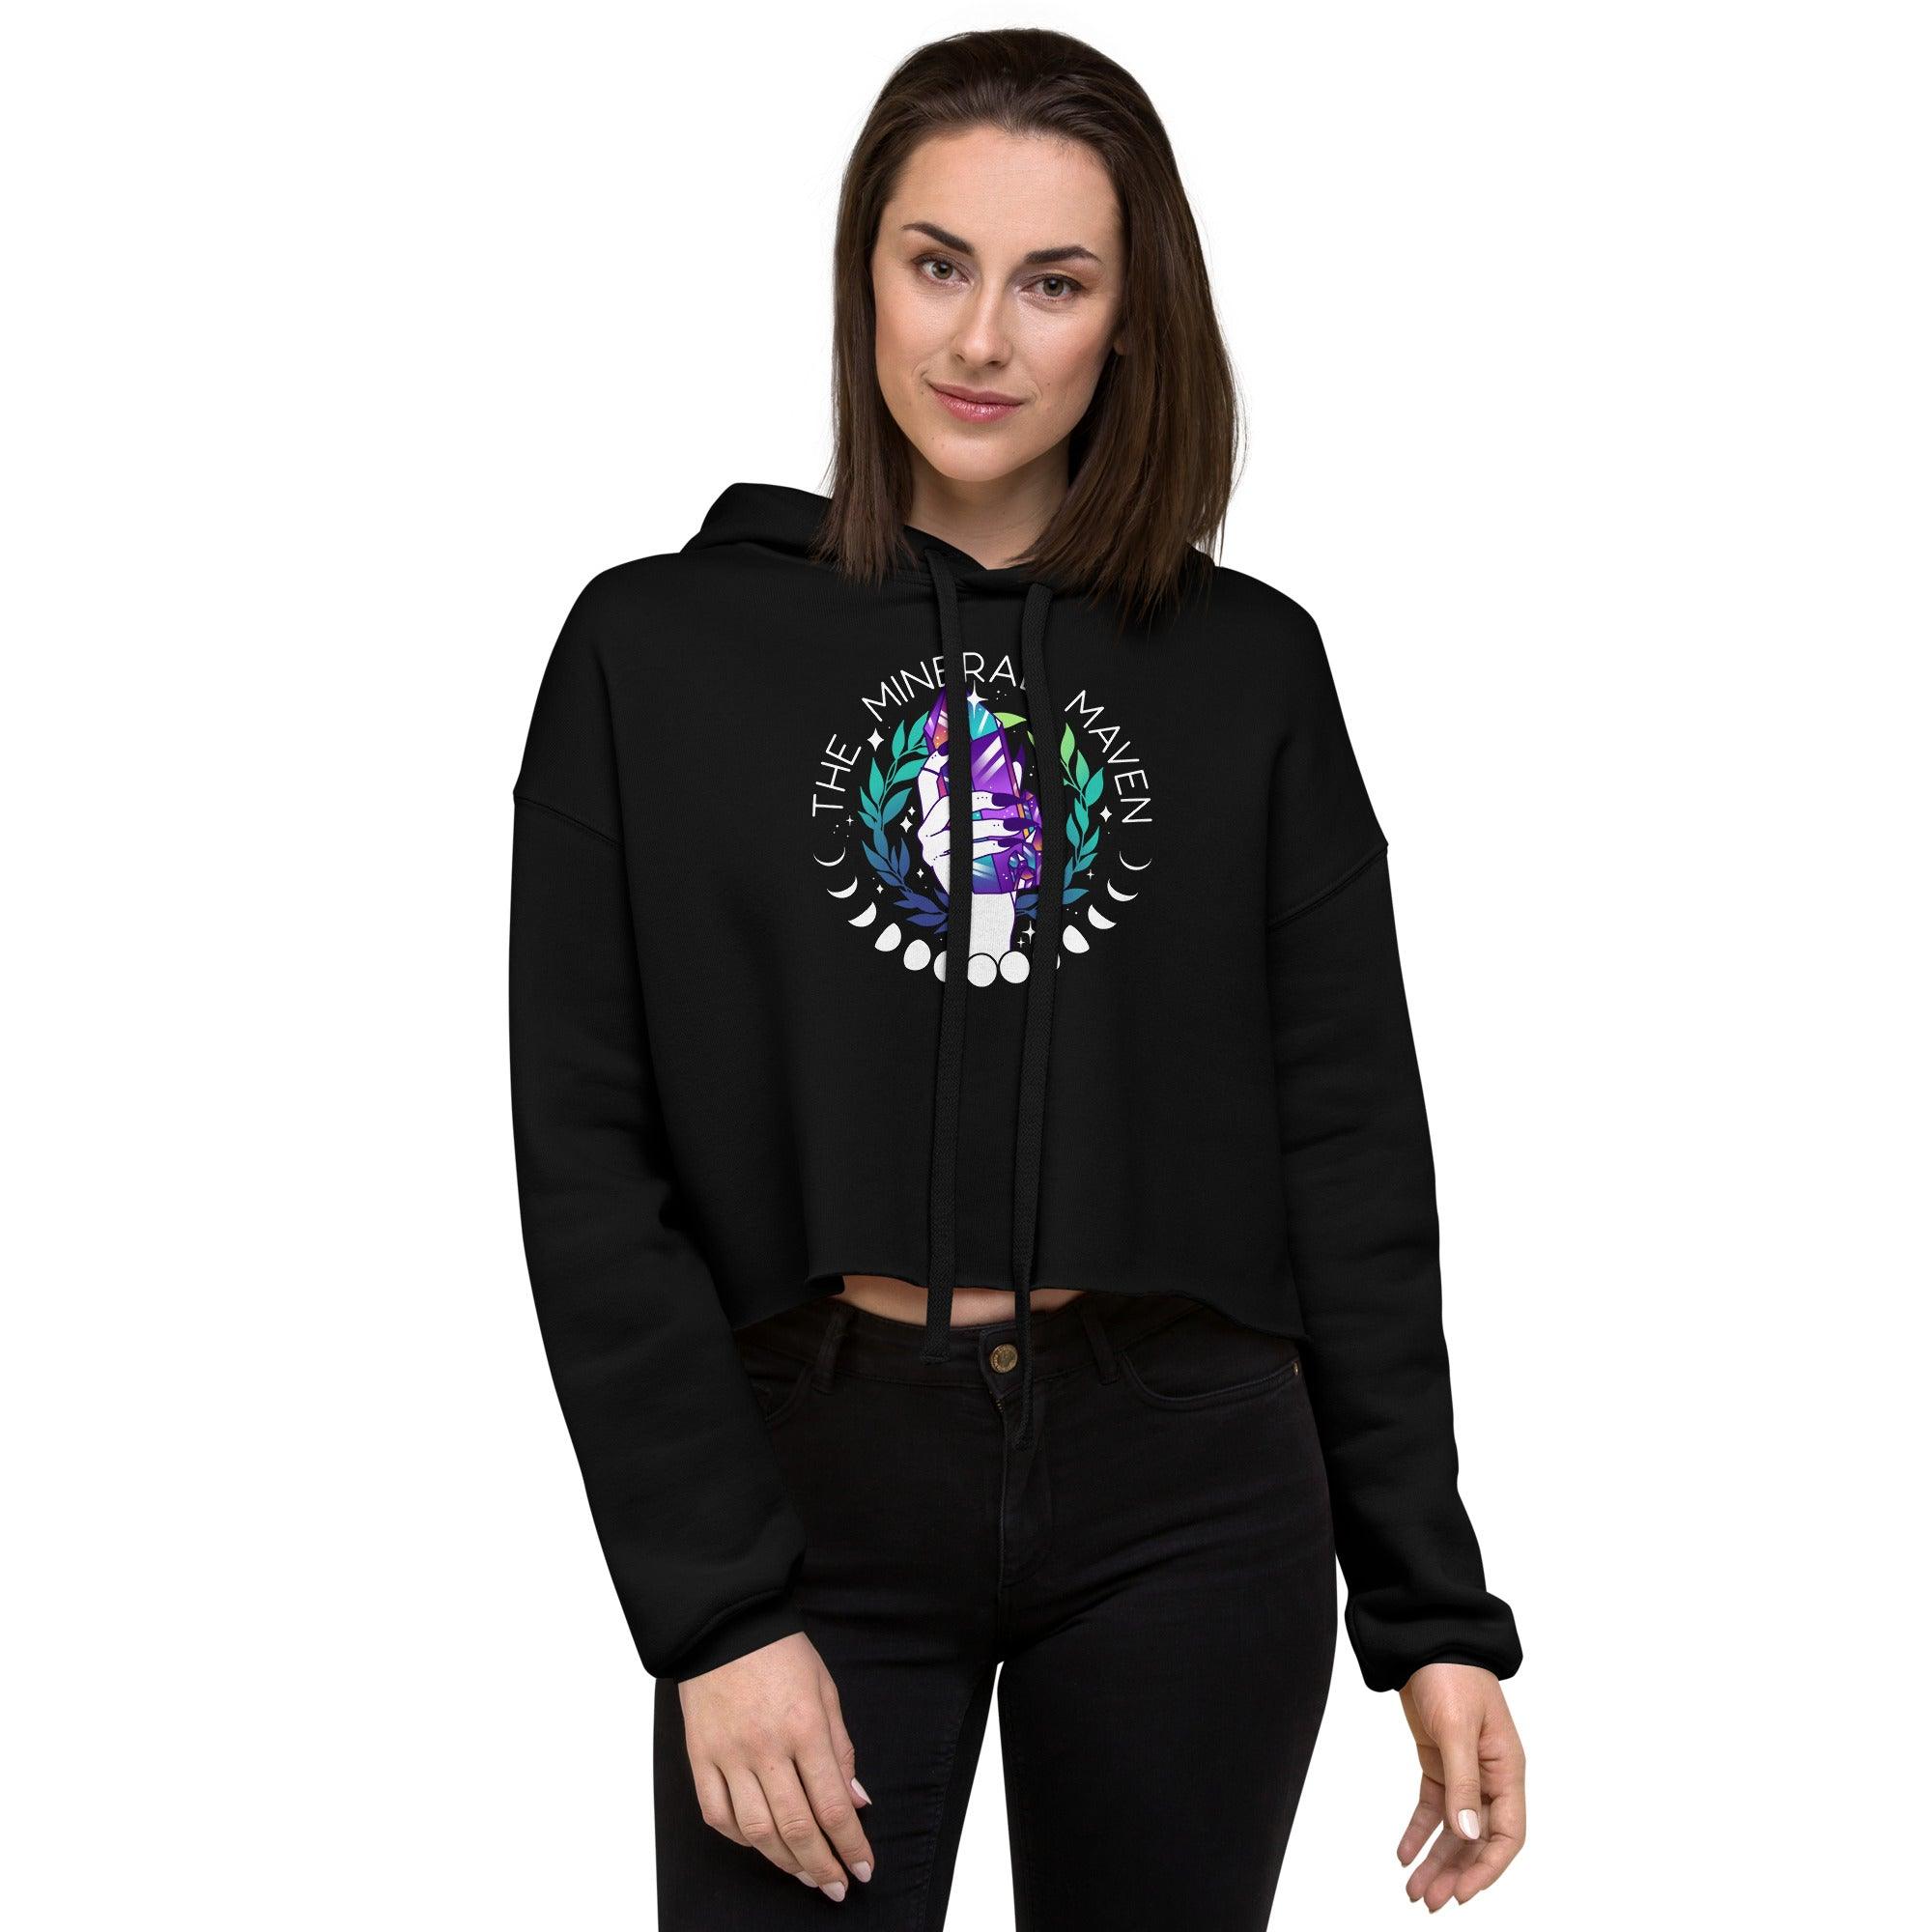 MM COLOR LOGO - CROP HOODIE - apparel, cropped hooodie, Friday the 13th, hoodie - The Mineral Maven